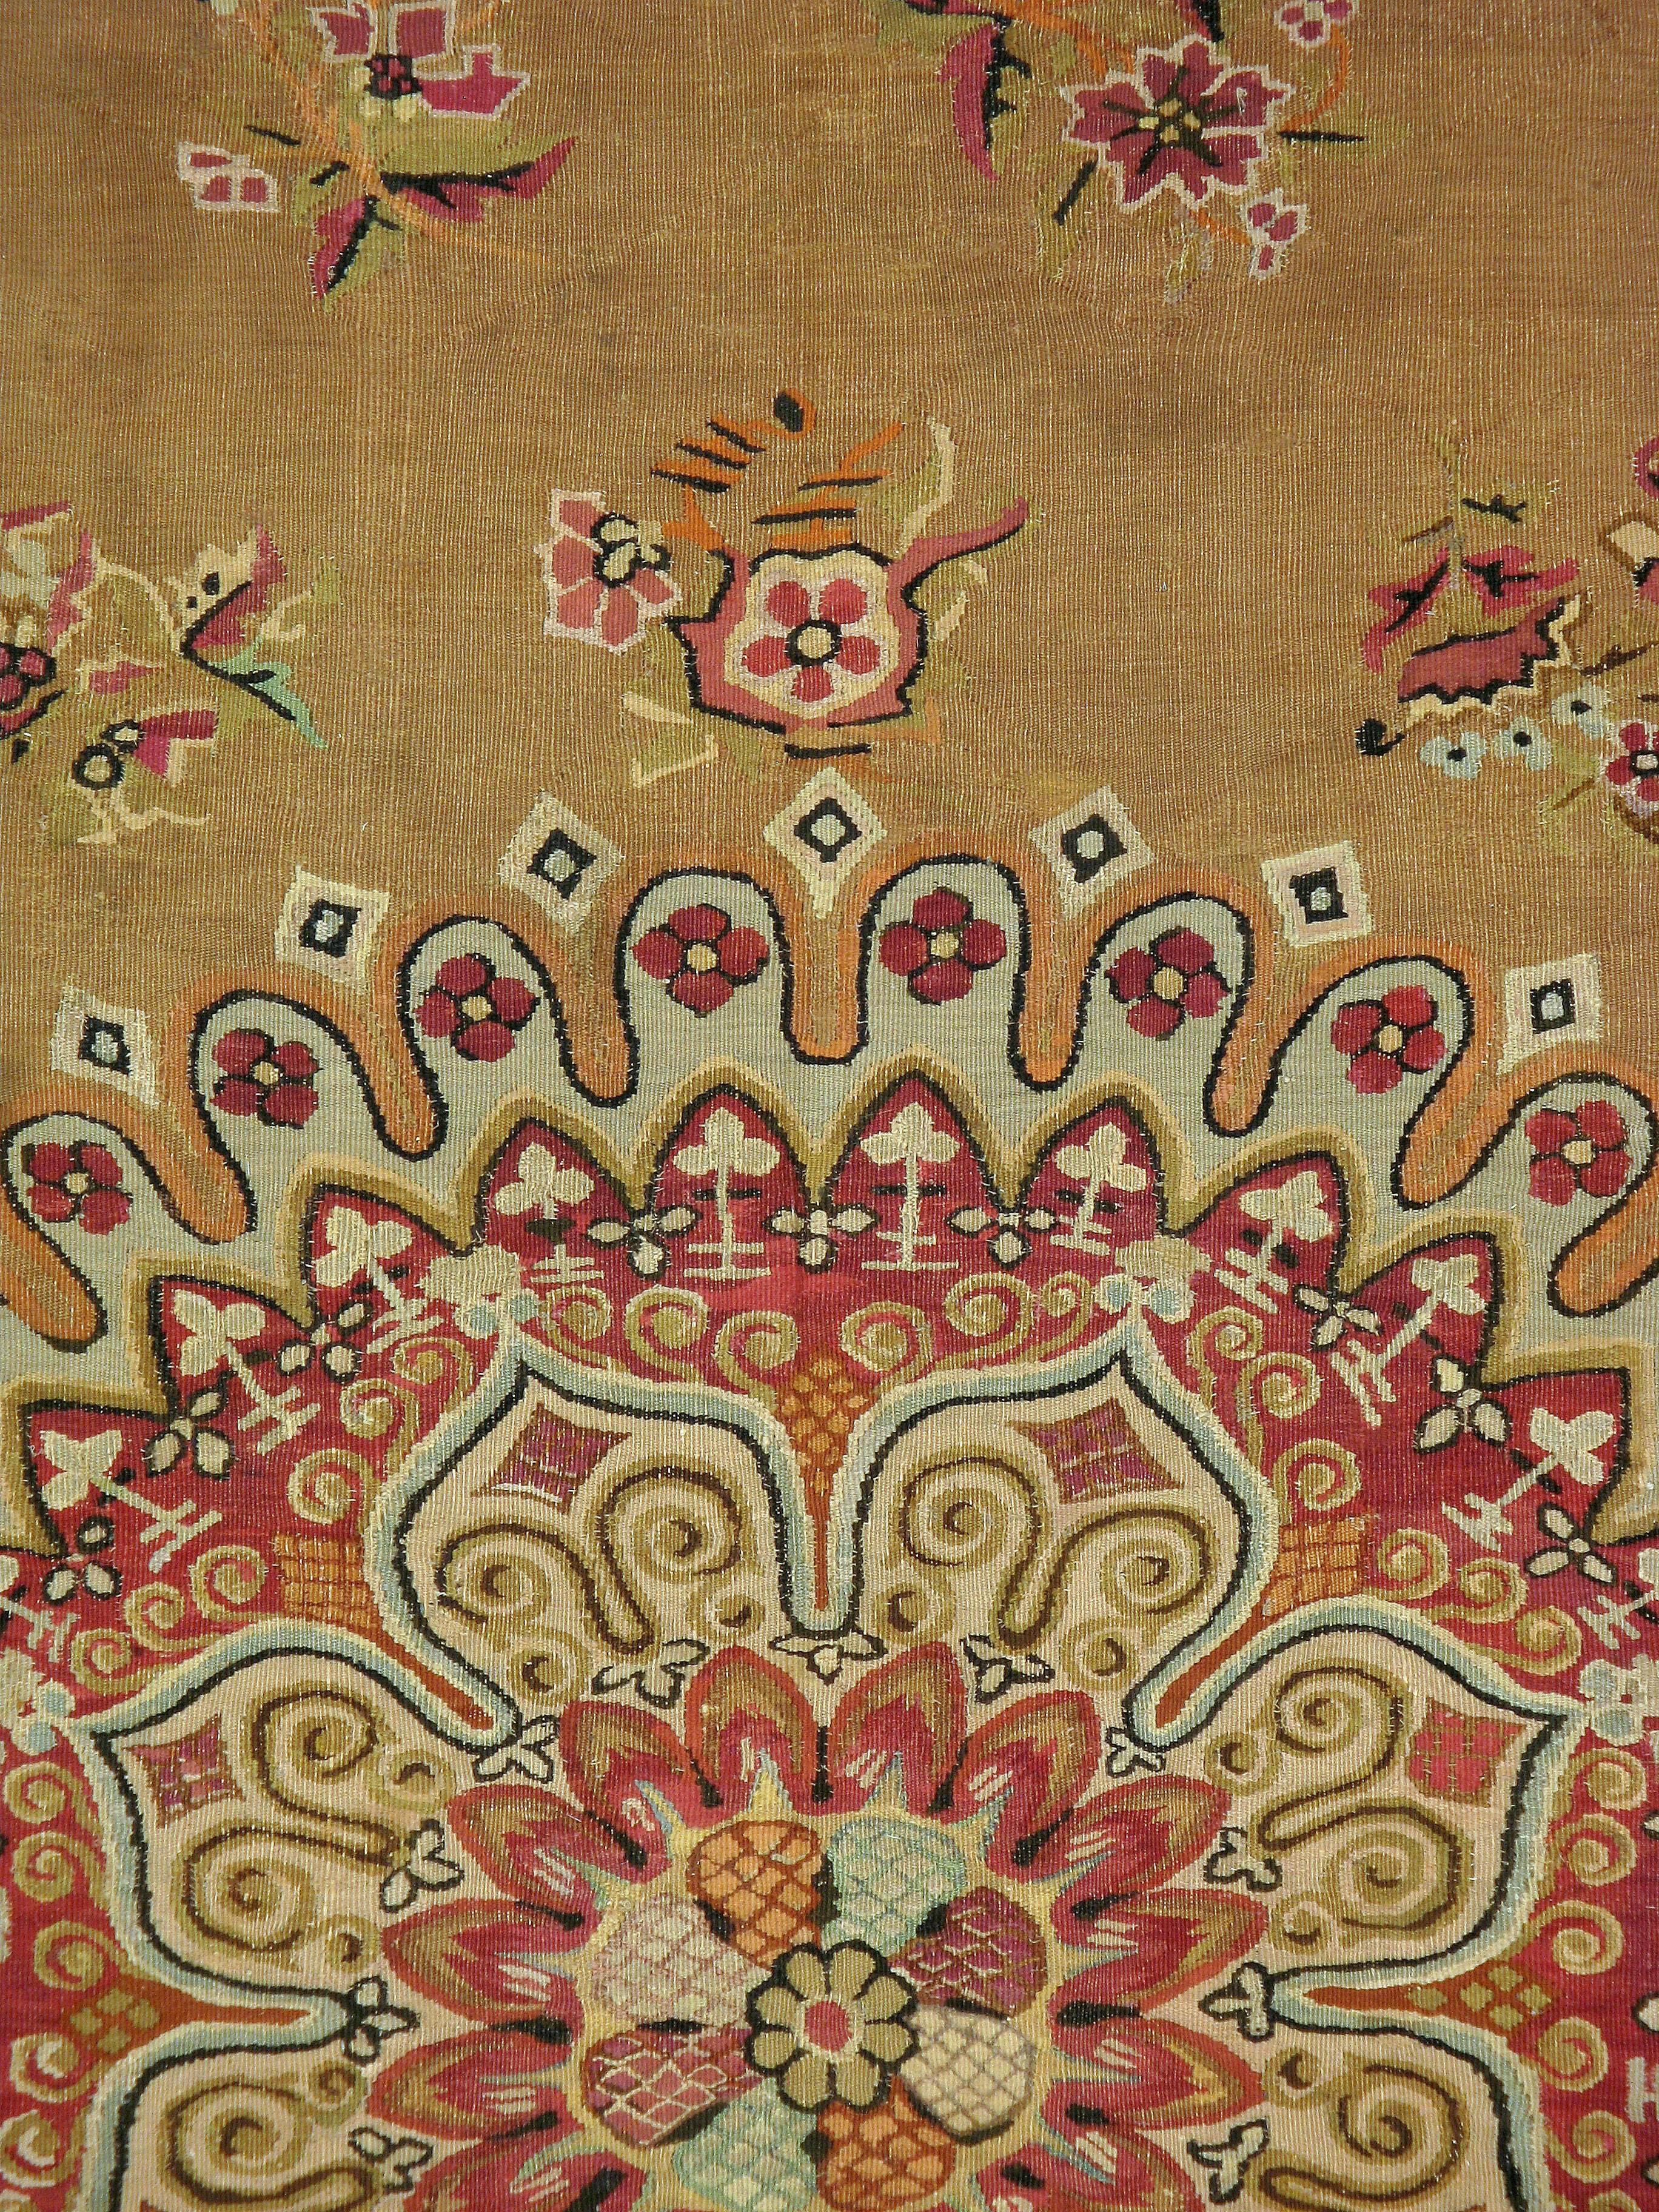 An antique flat-woven French Aubusson carpet from the turn of the 20th century.